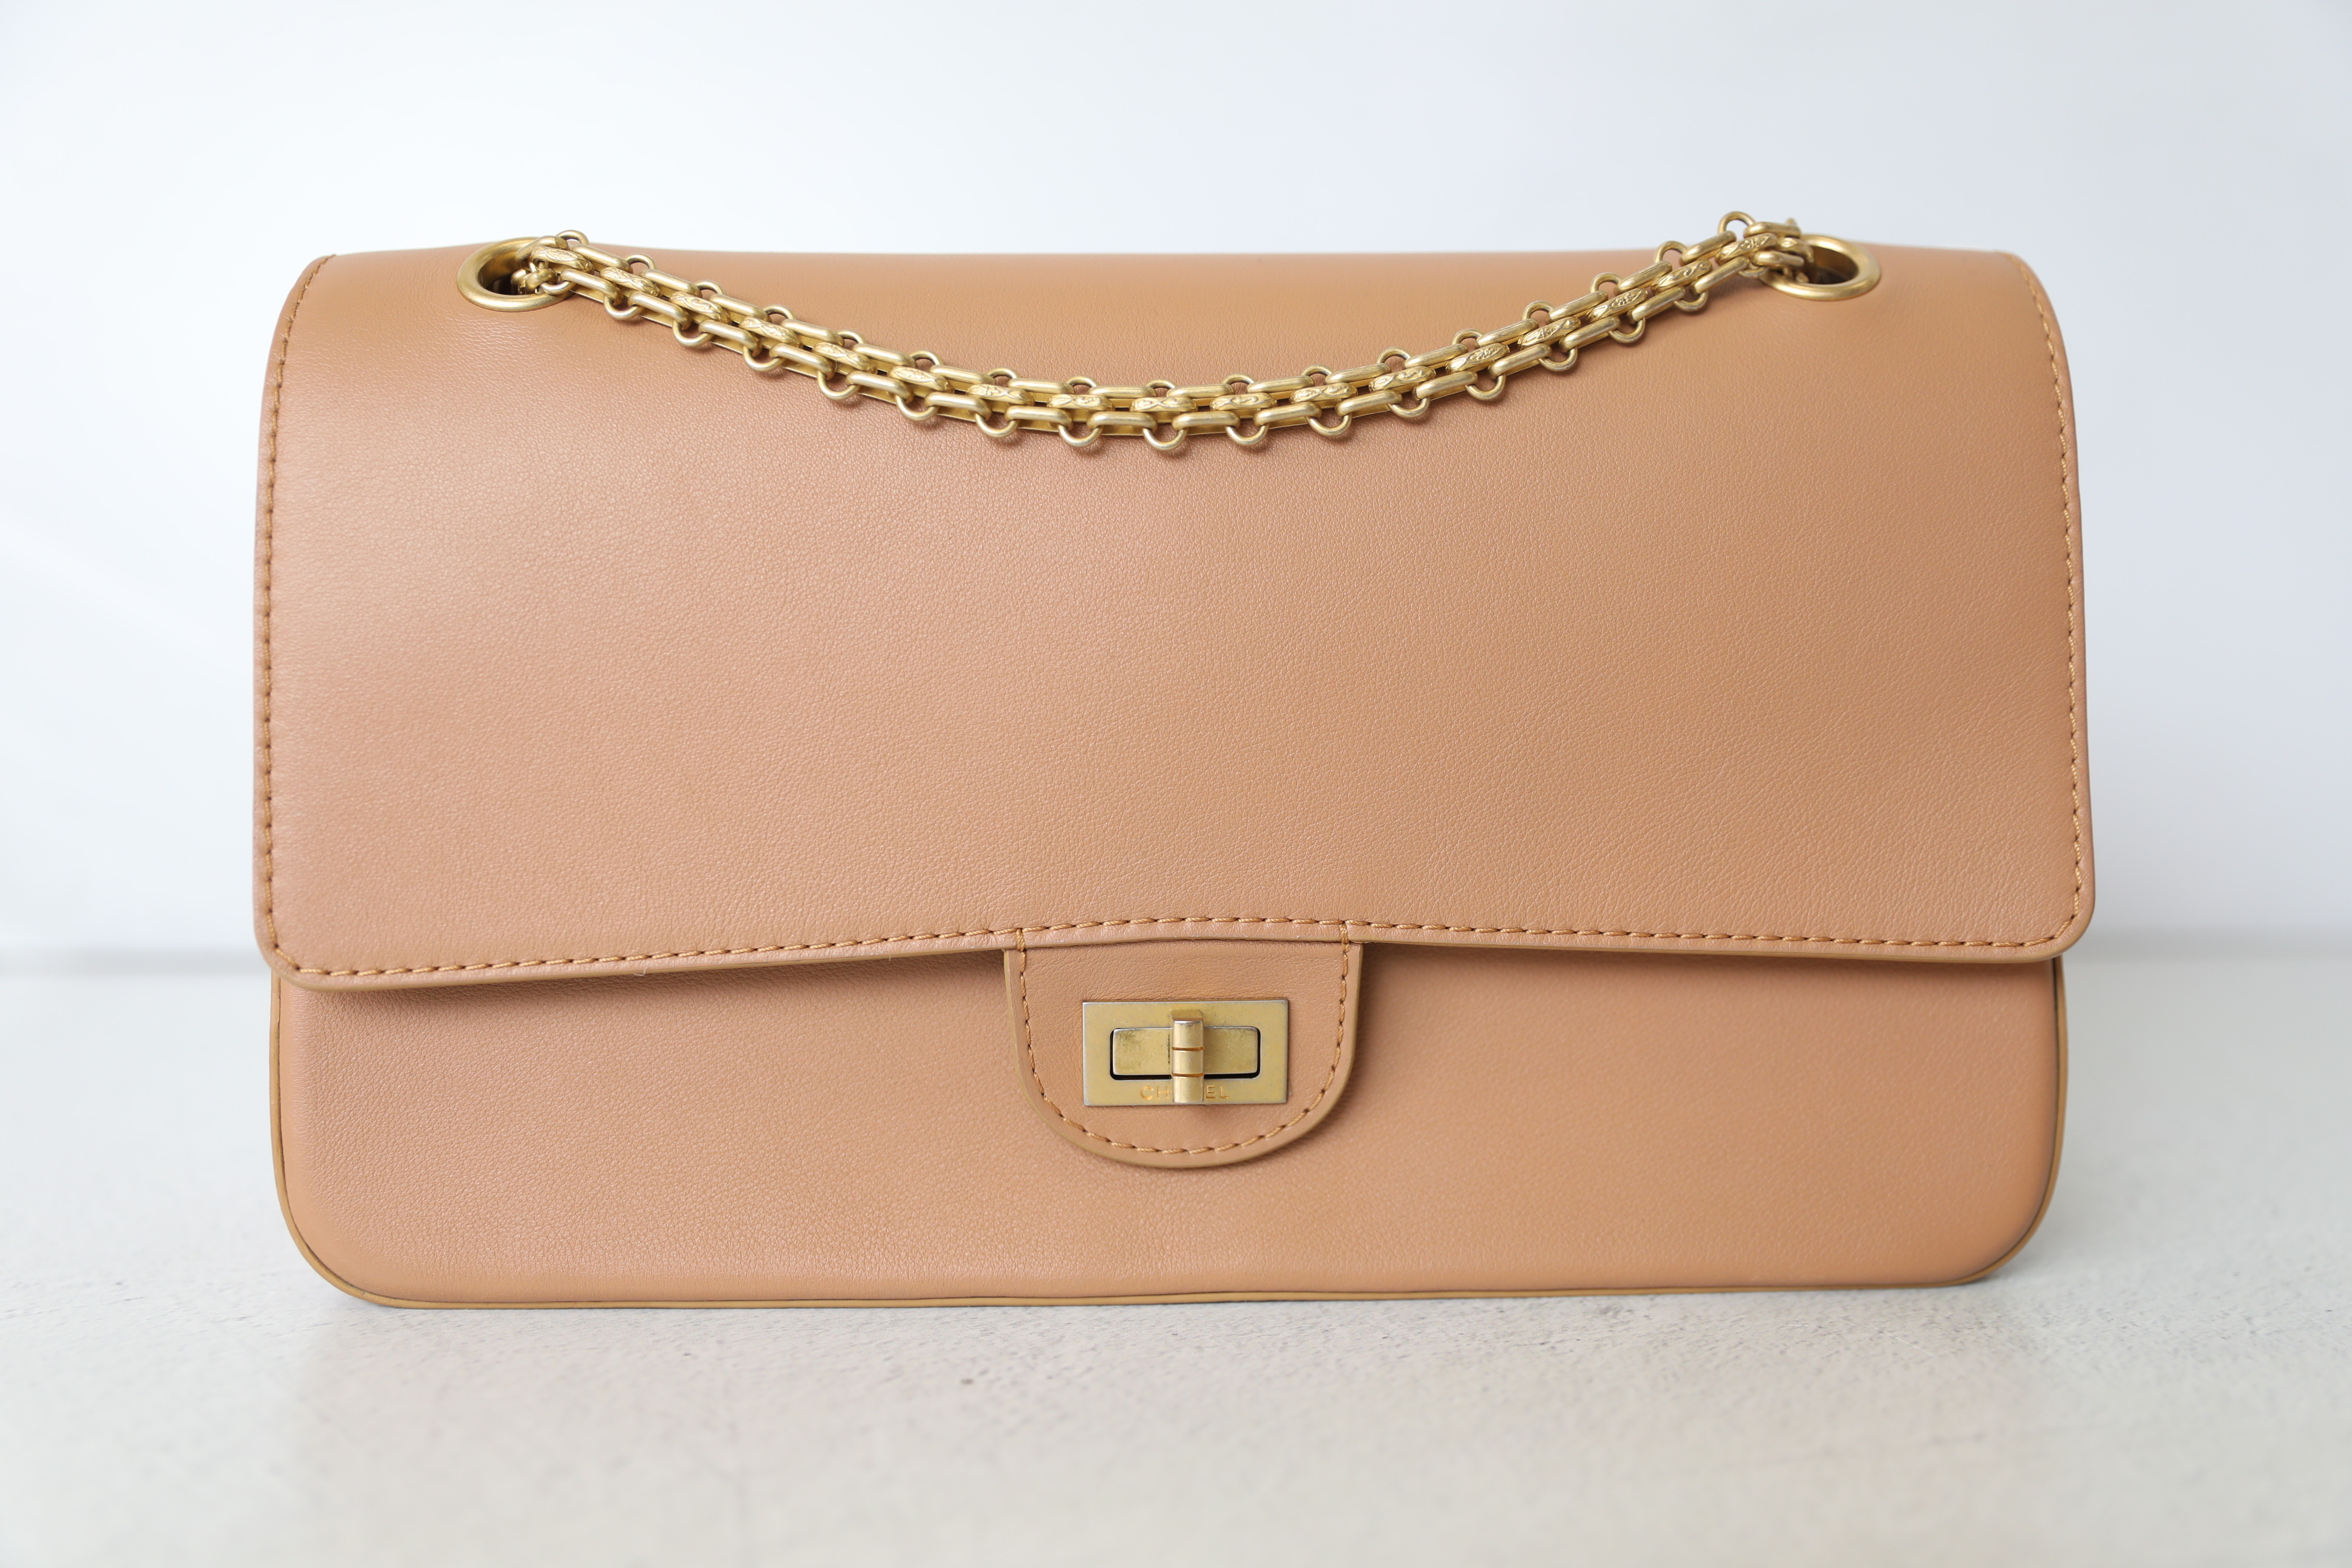 Chanel Reissue 226, Tan Calfskin Leather with Brushed Gold